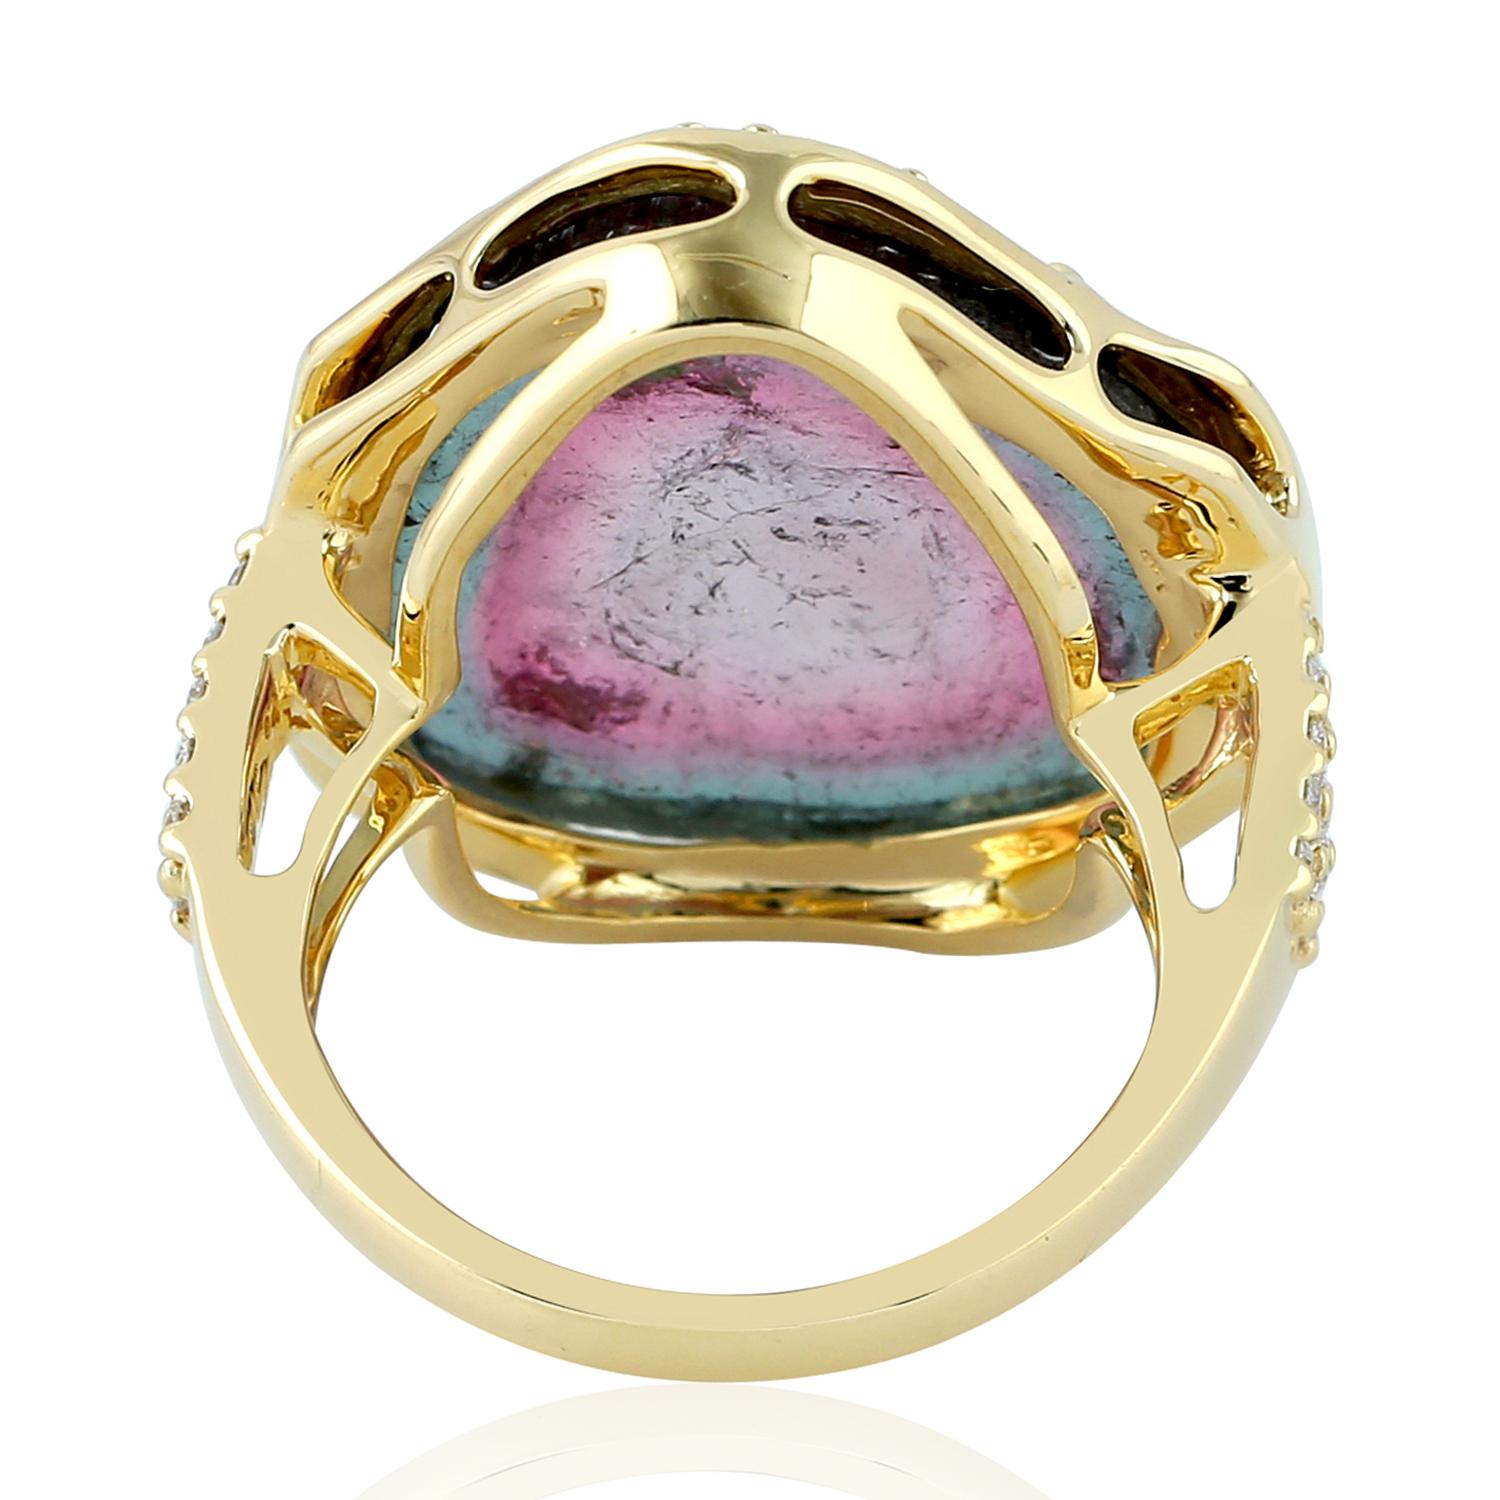 Mixed Cut Sliced Watermelon Tourmaline Ring with Pave Diamonds Made in 18k Yellow Gold For Sale